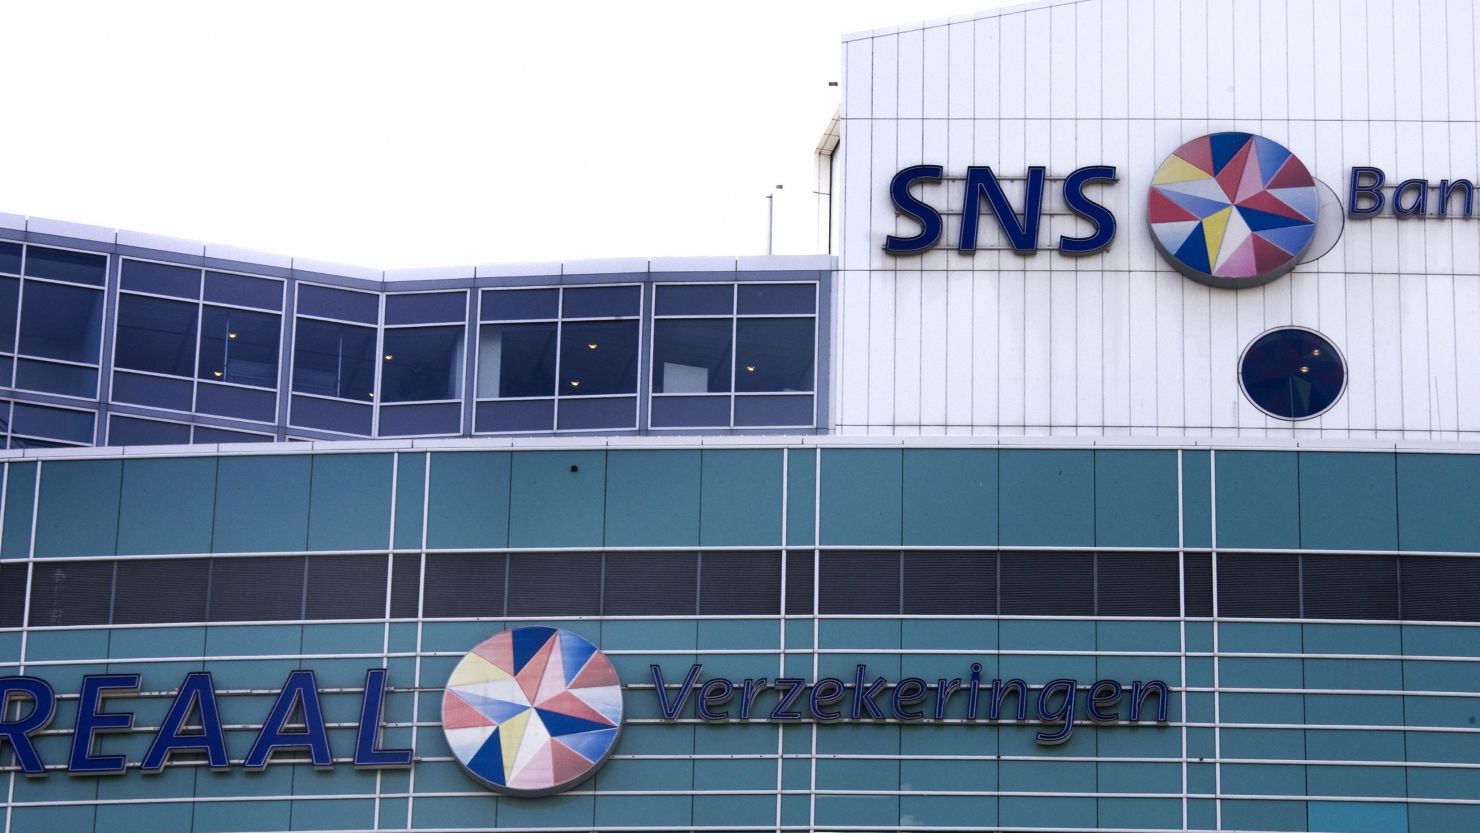 Ronald Latenstein, SNS Reaal's chief executive, as well as the bank's chief financial officer resigned.